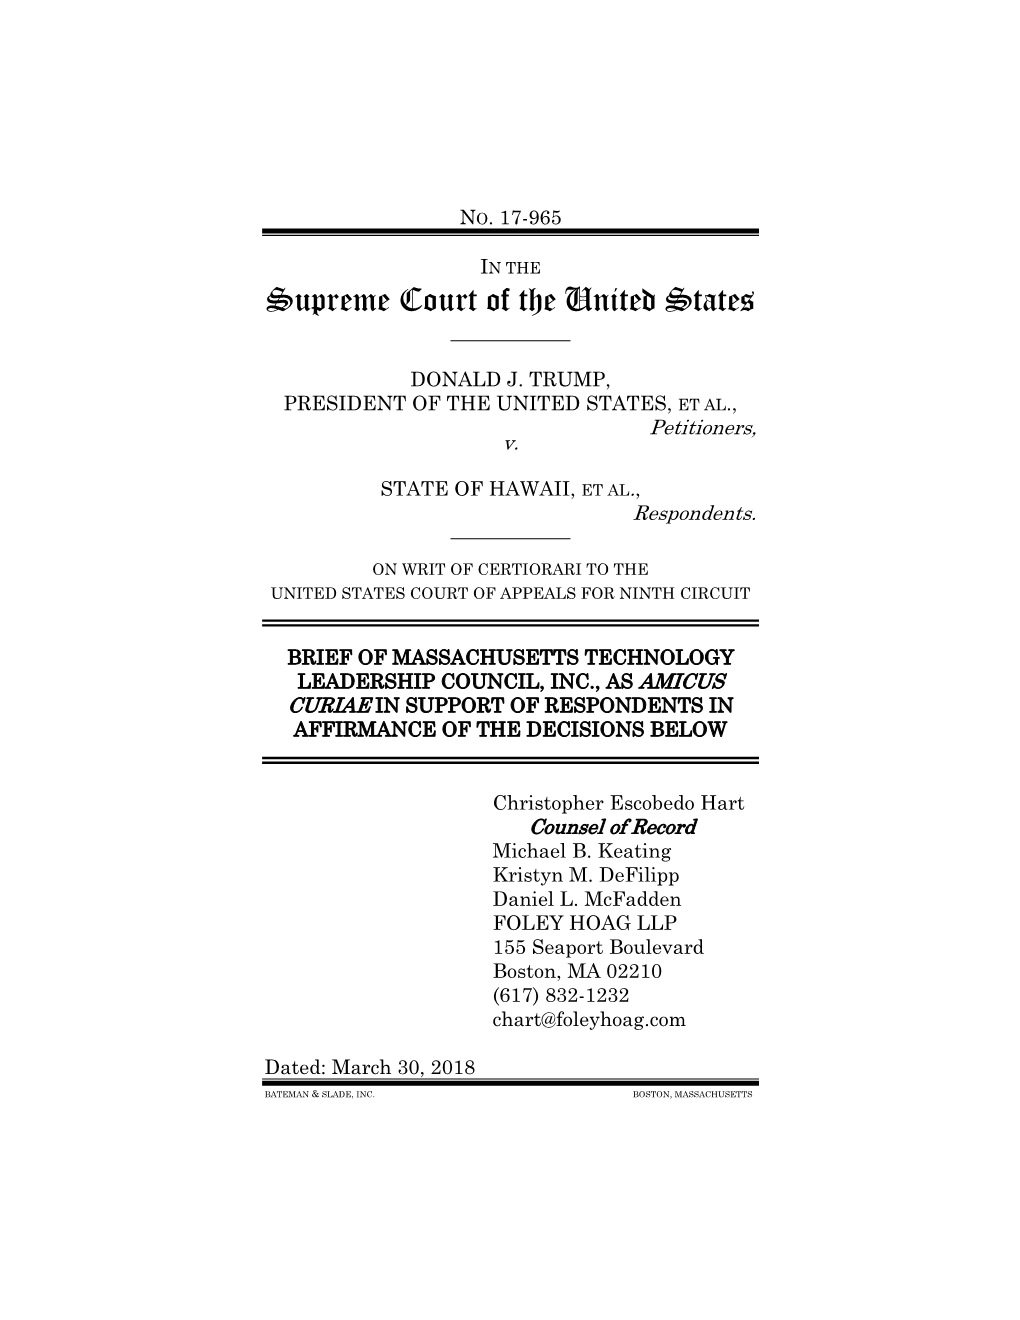 Amicus Brief of Massachusetts Technology